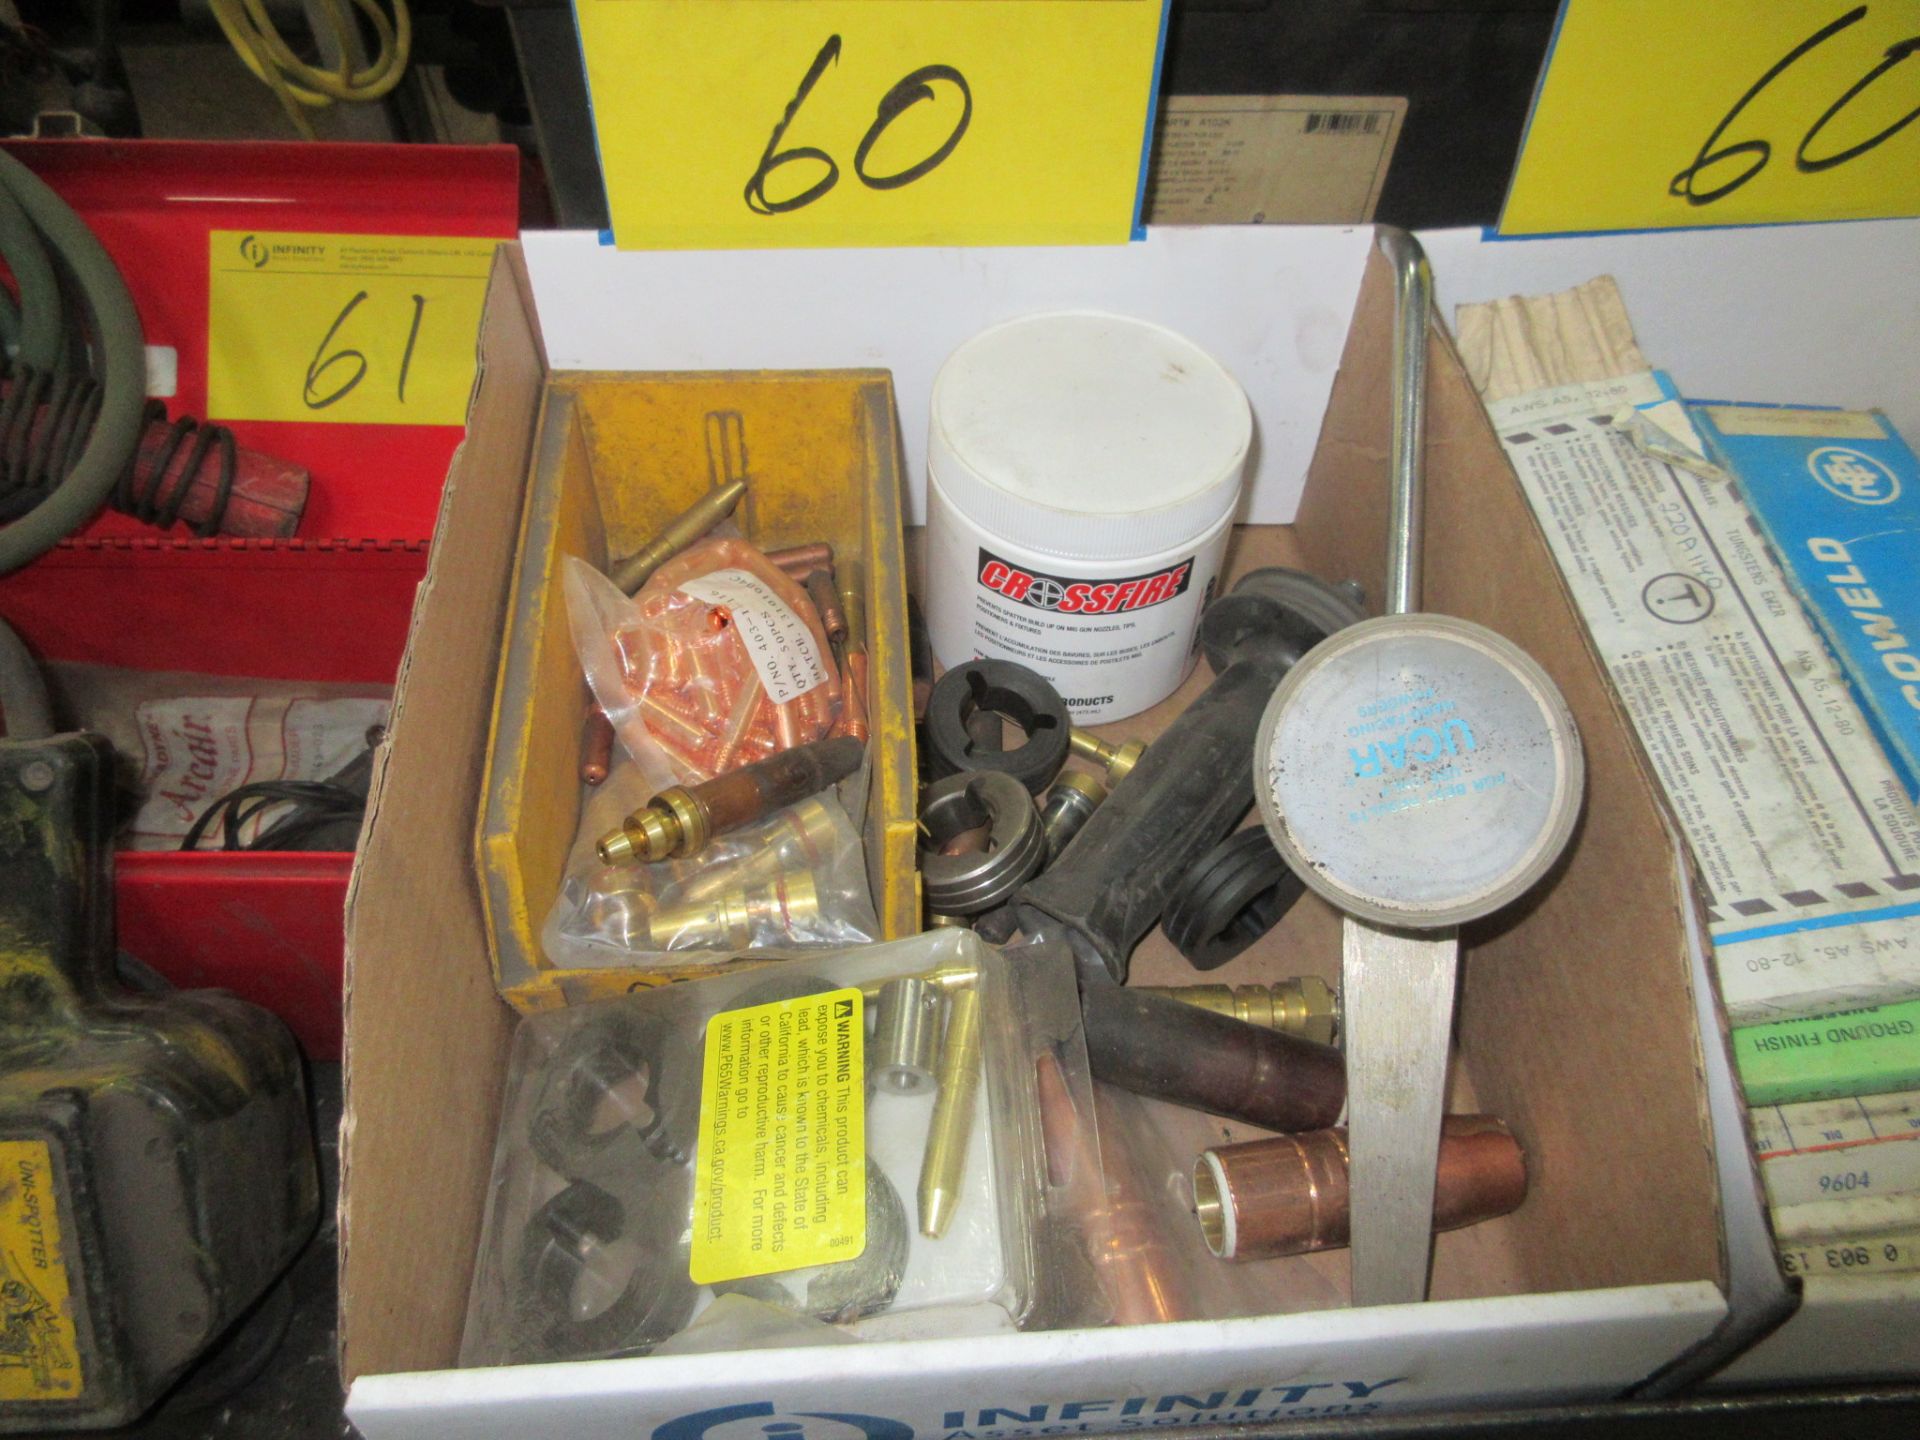 LOT OF WELDING SUPPLIES ON CART INCLUDING TUNCOWELD ELECTRODES, CABLES, TIPS, PARTS, ETC. - Image 2 of 9